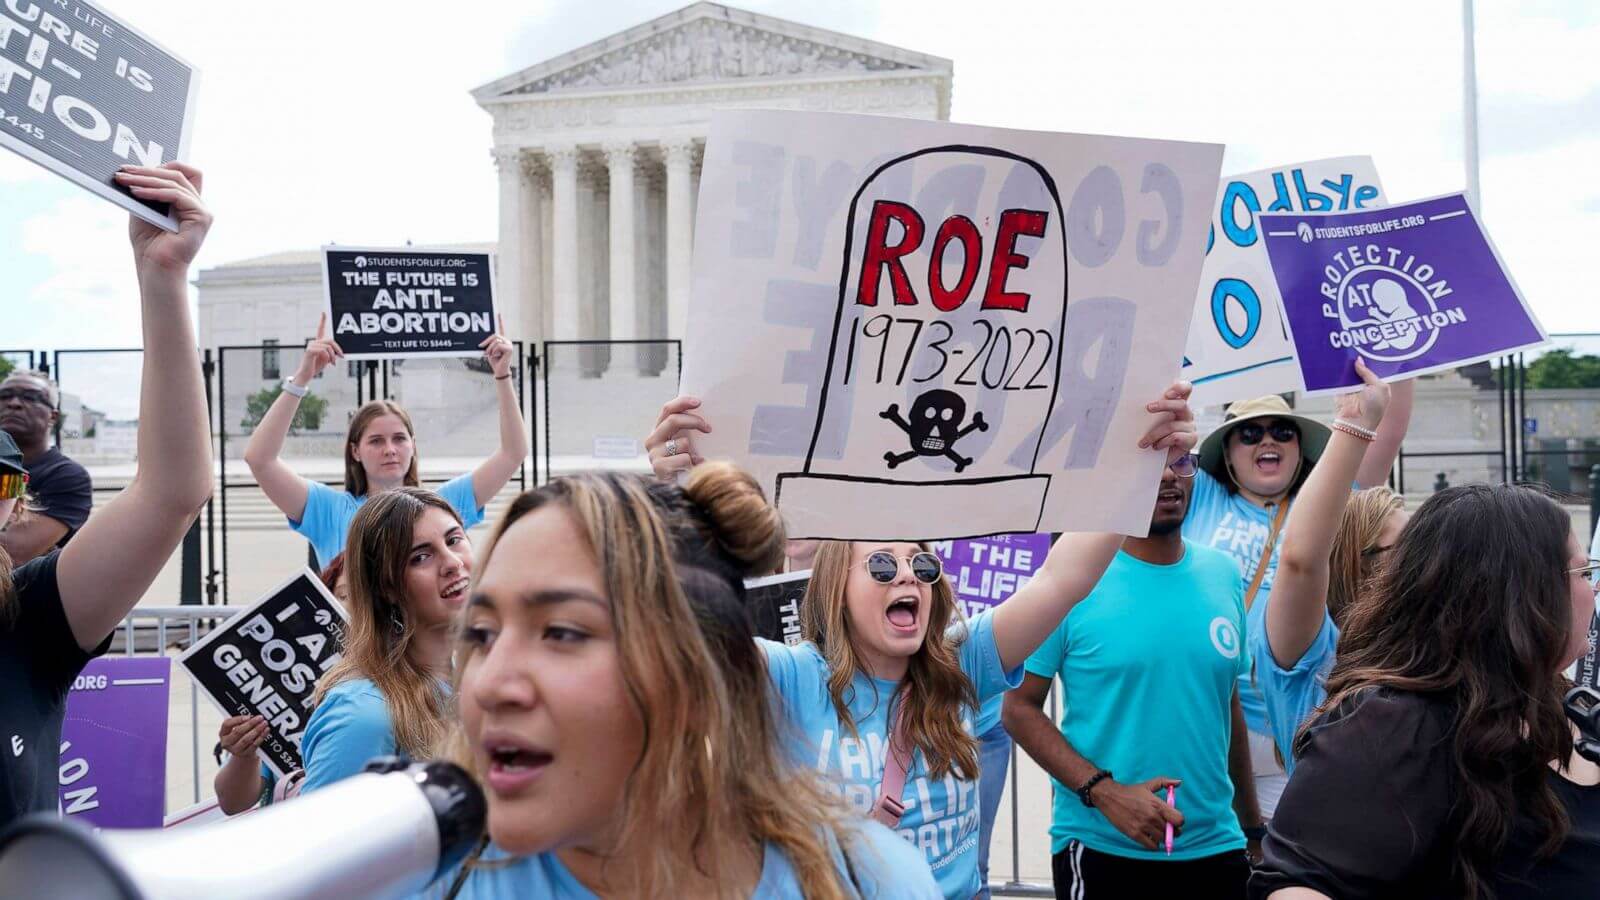 US Supreme Court Overturns Roe v. Wade, Effectively Reversing Abortion Rights